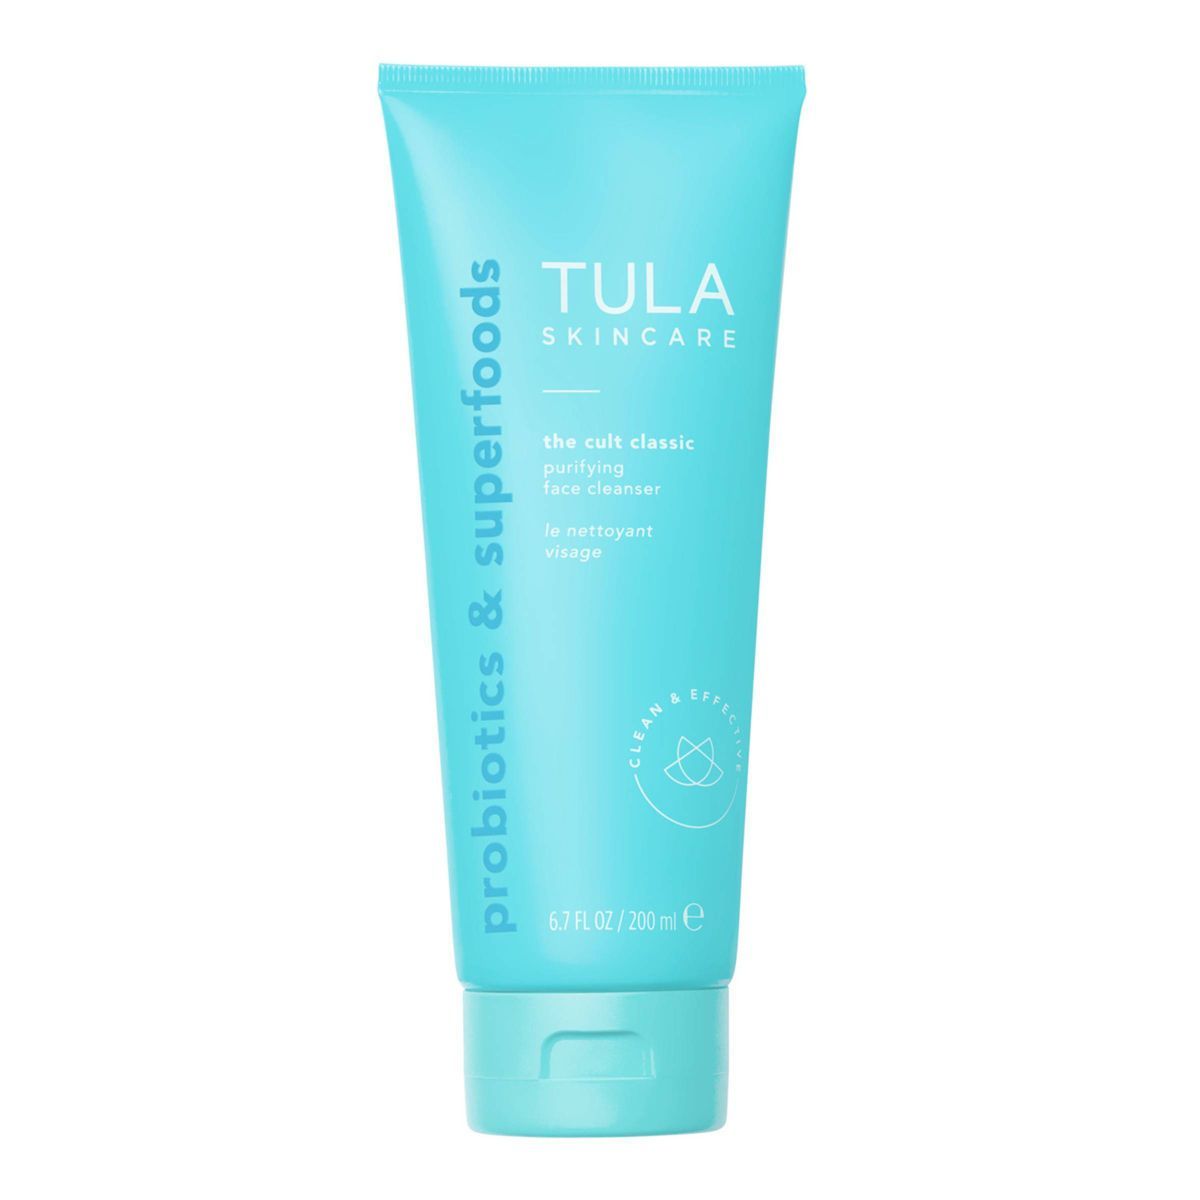 TULA SKINCARE The Cult Classic Purifying Face Cleanser - Ulta Beauty | Target